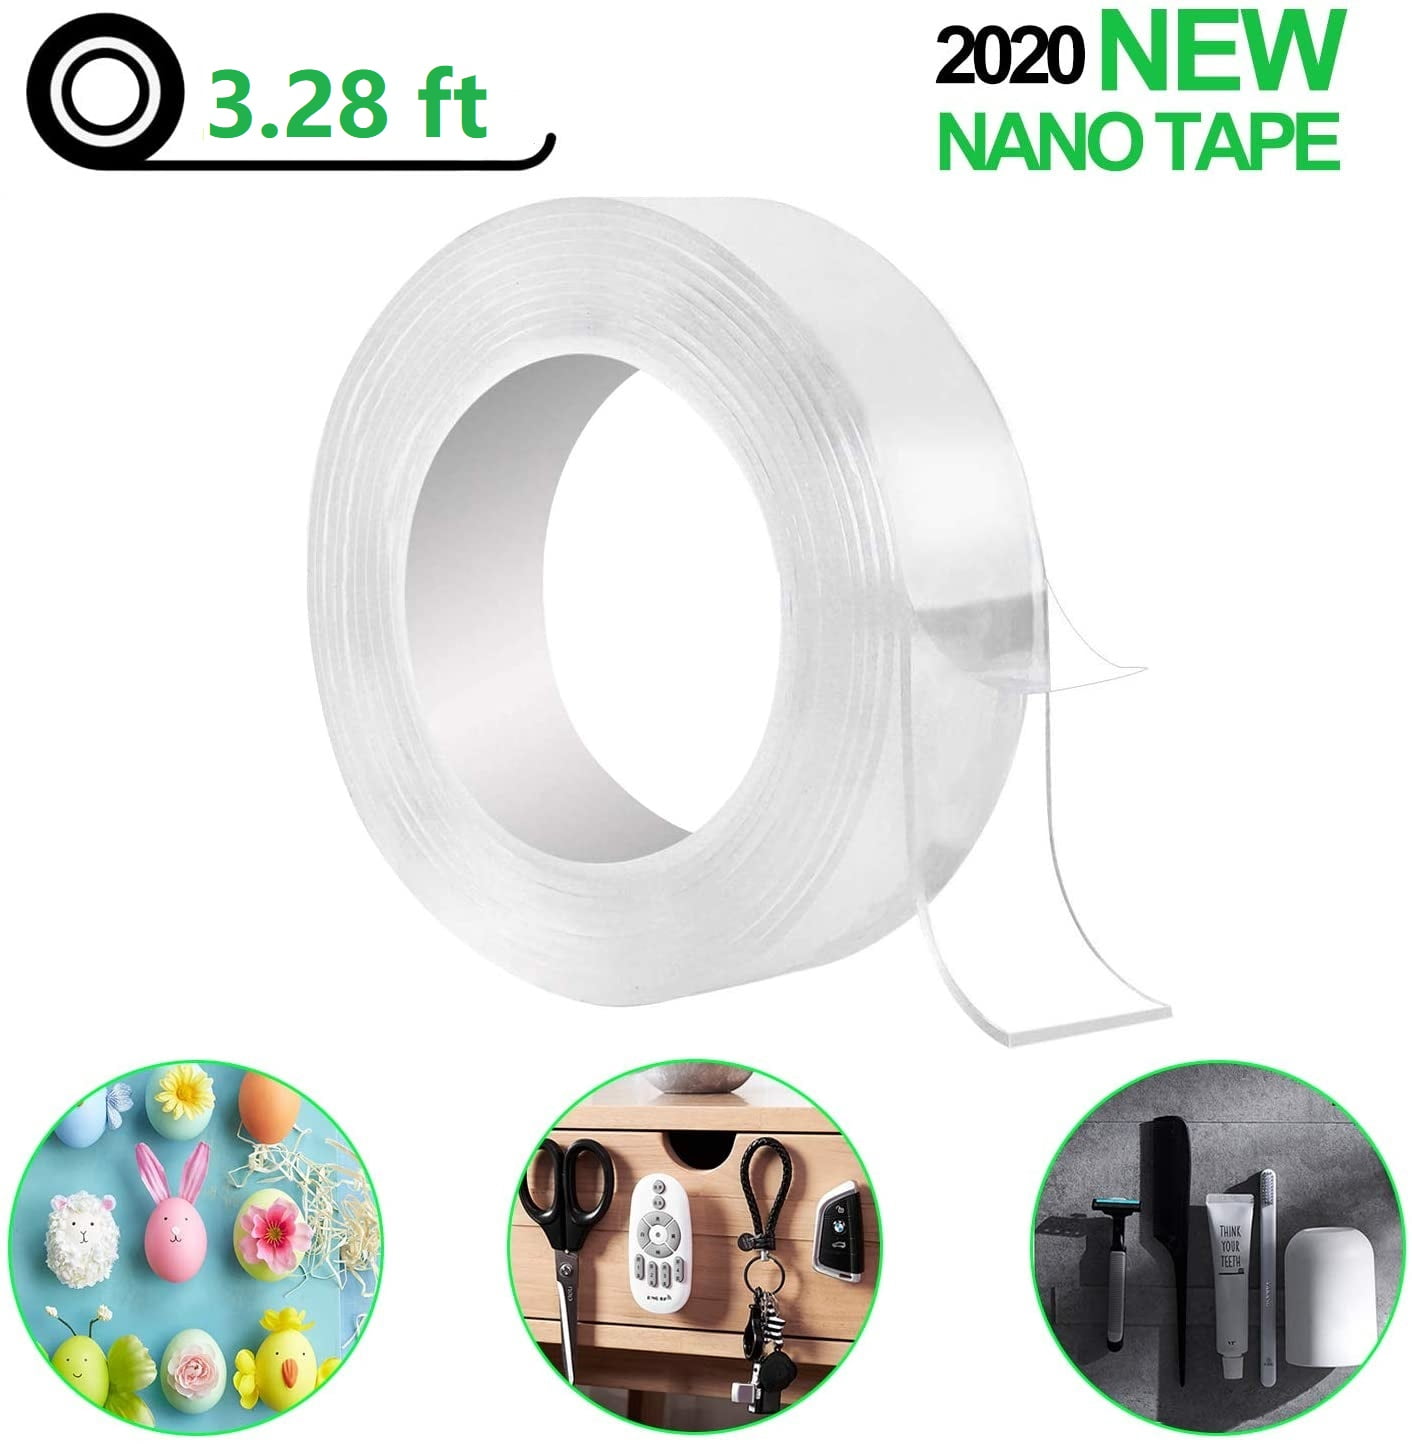 Multifunctional Double-Sided Adhesive Nano Tape Traceless Washable  Removable Tapes Indoor Outdoor Gel Grip Sticker